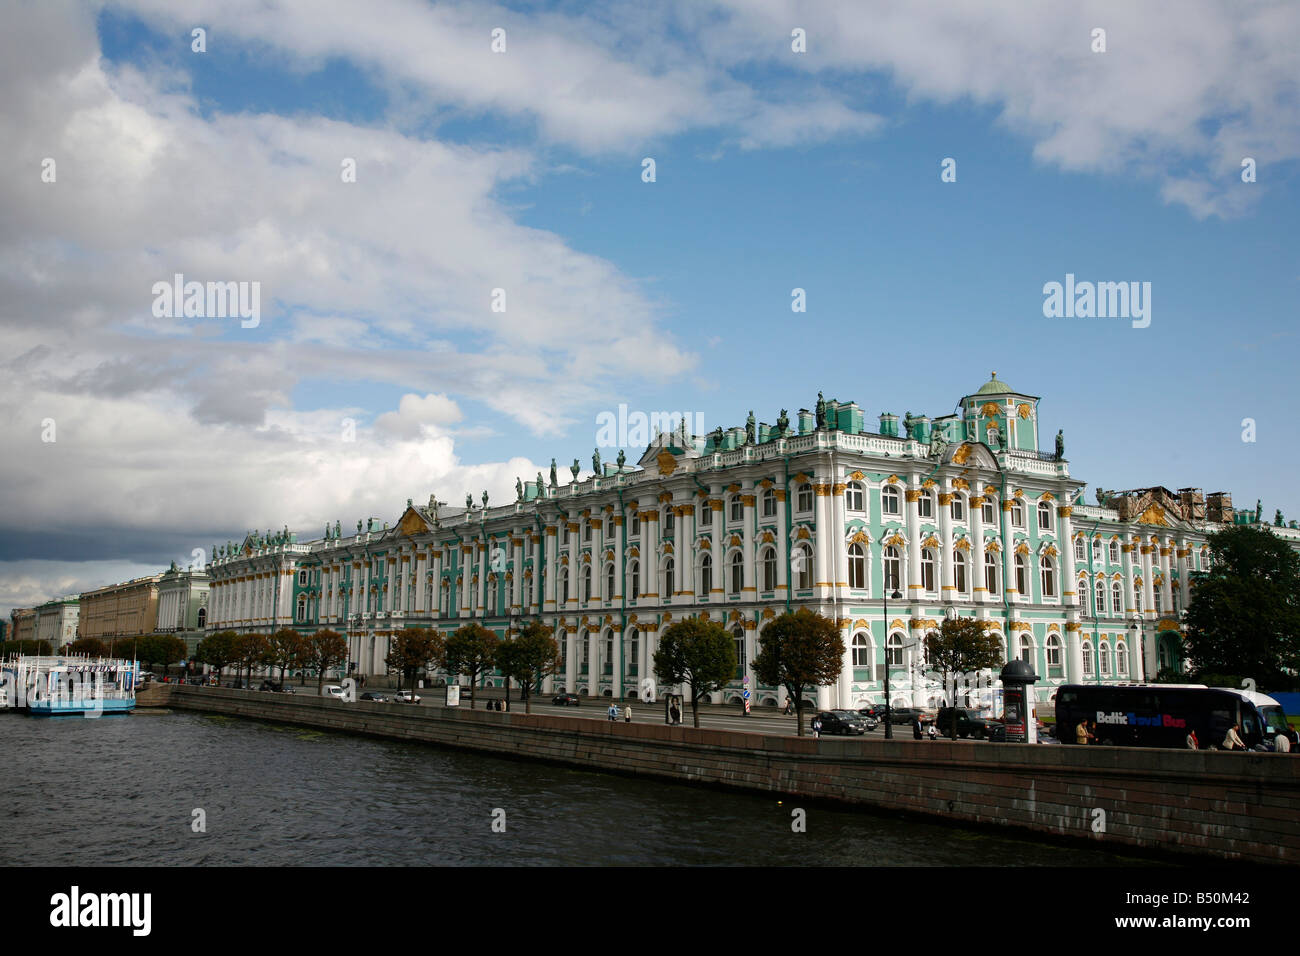 Aug 2008 - The Winter Palace St Petersburg Russia Stock Photo